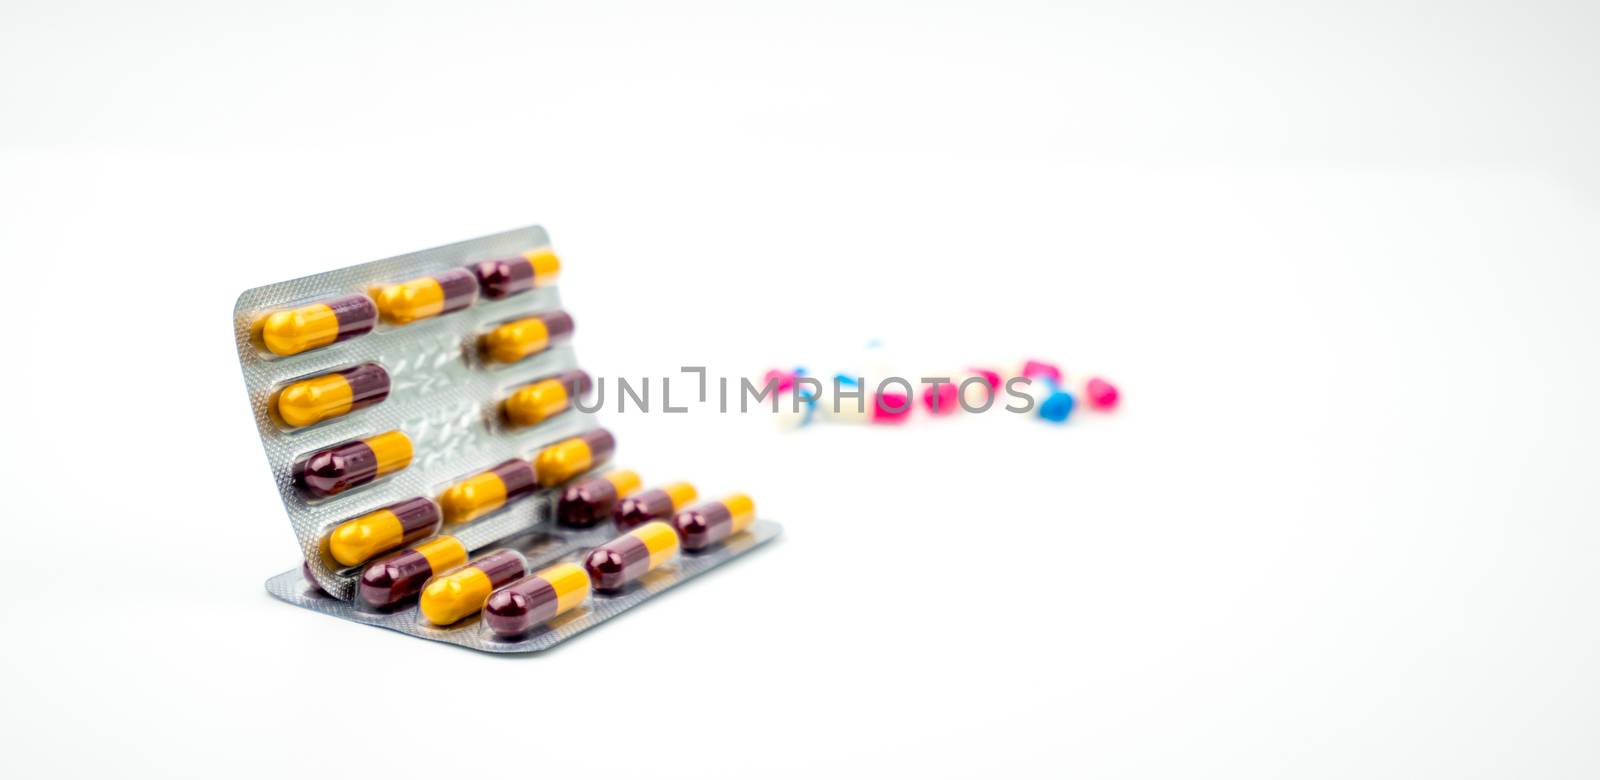 Colorful of antibiotic capsules pills on blurred background with copy space. Drug resistance, antibiotic drug use with reasonable, health policy and health insurance concept. Pharmaceutical industry. Pharmacy background. by Fahroni